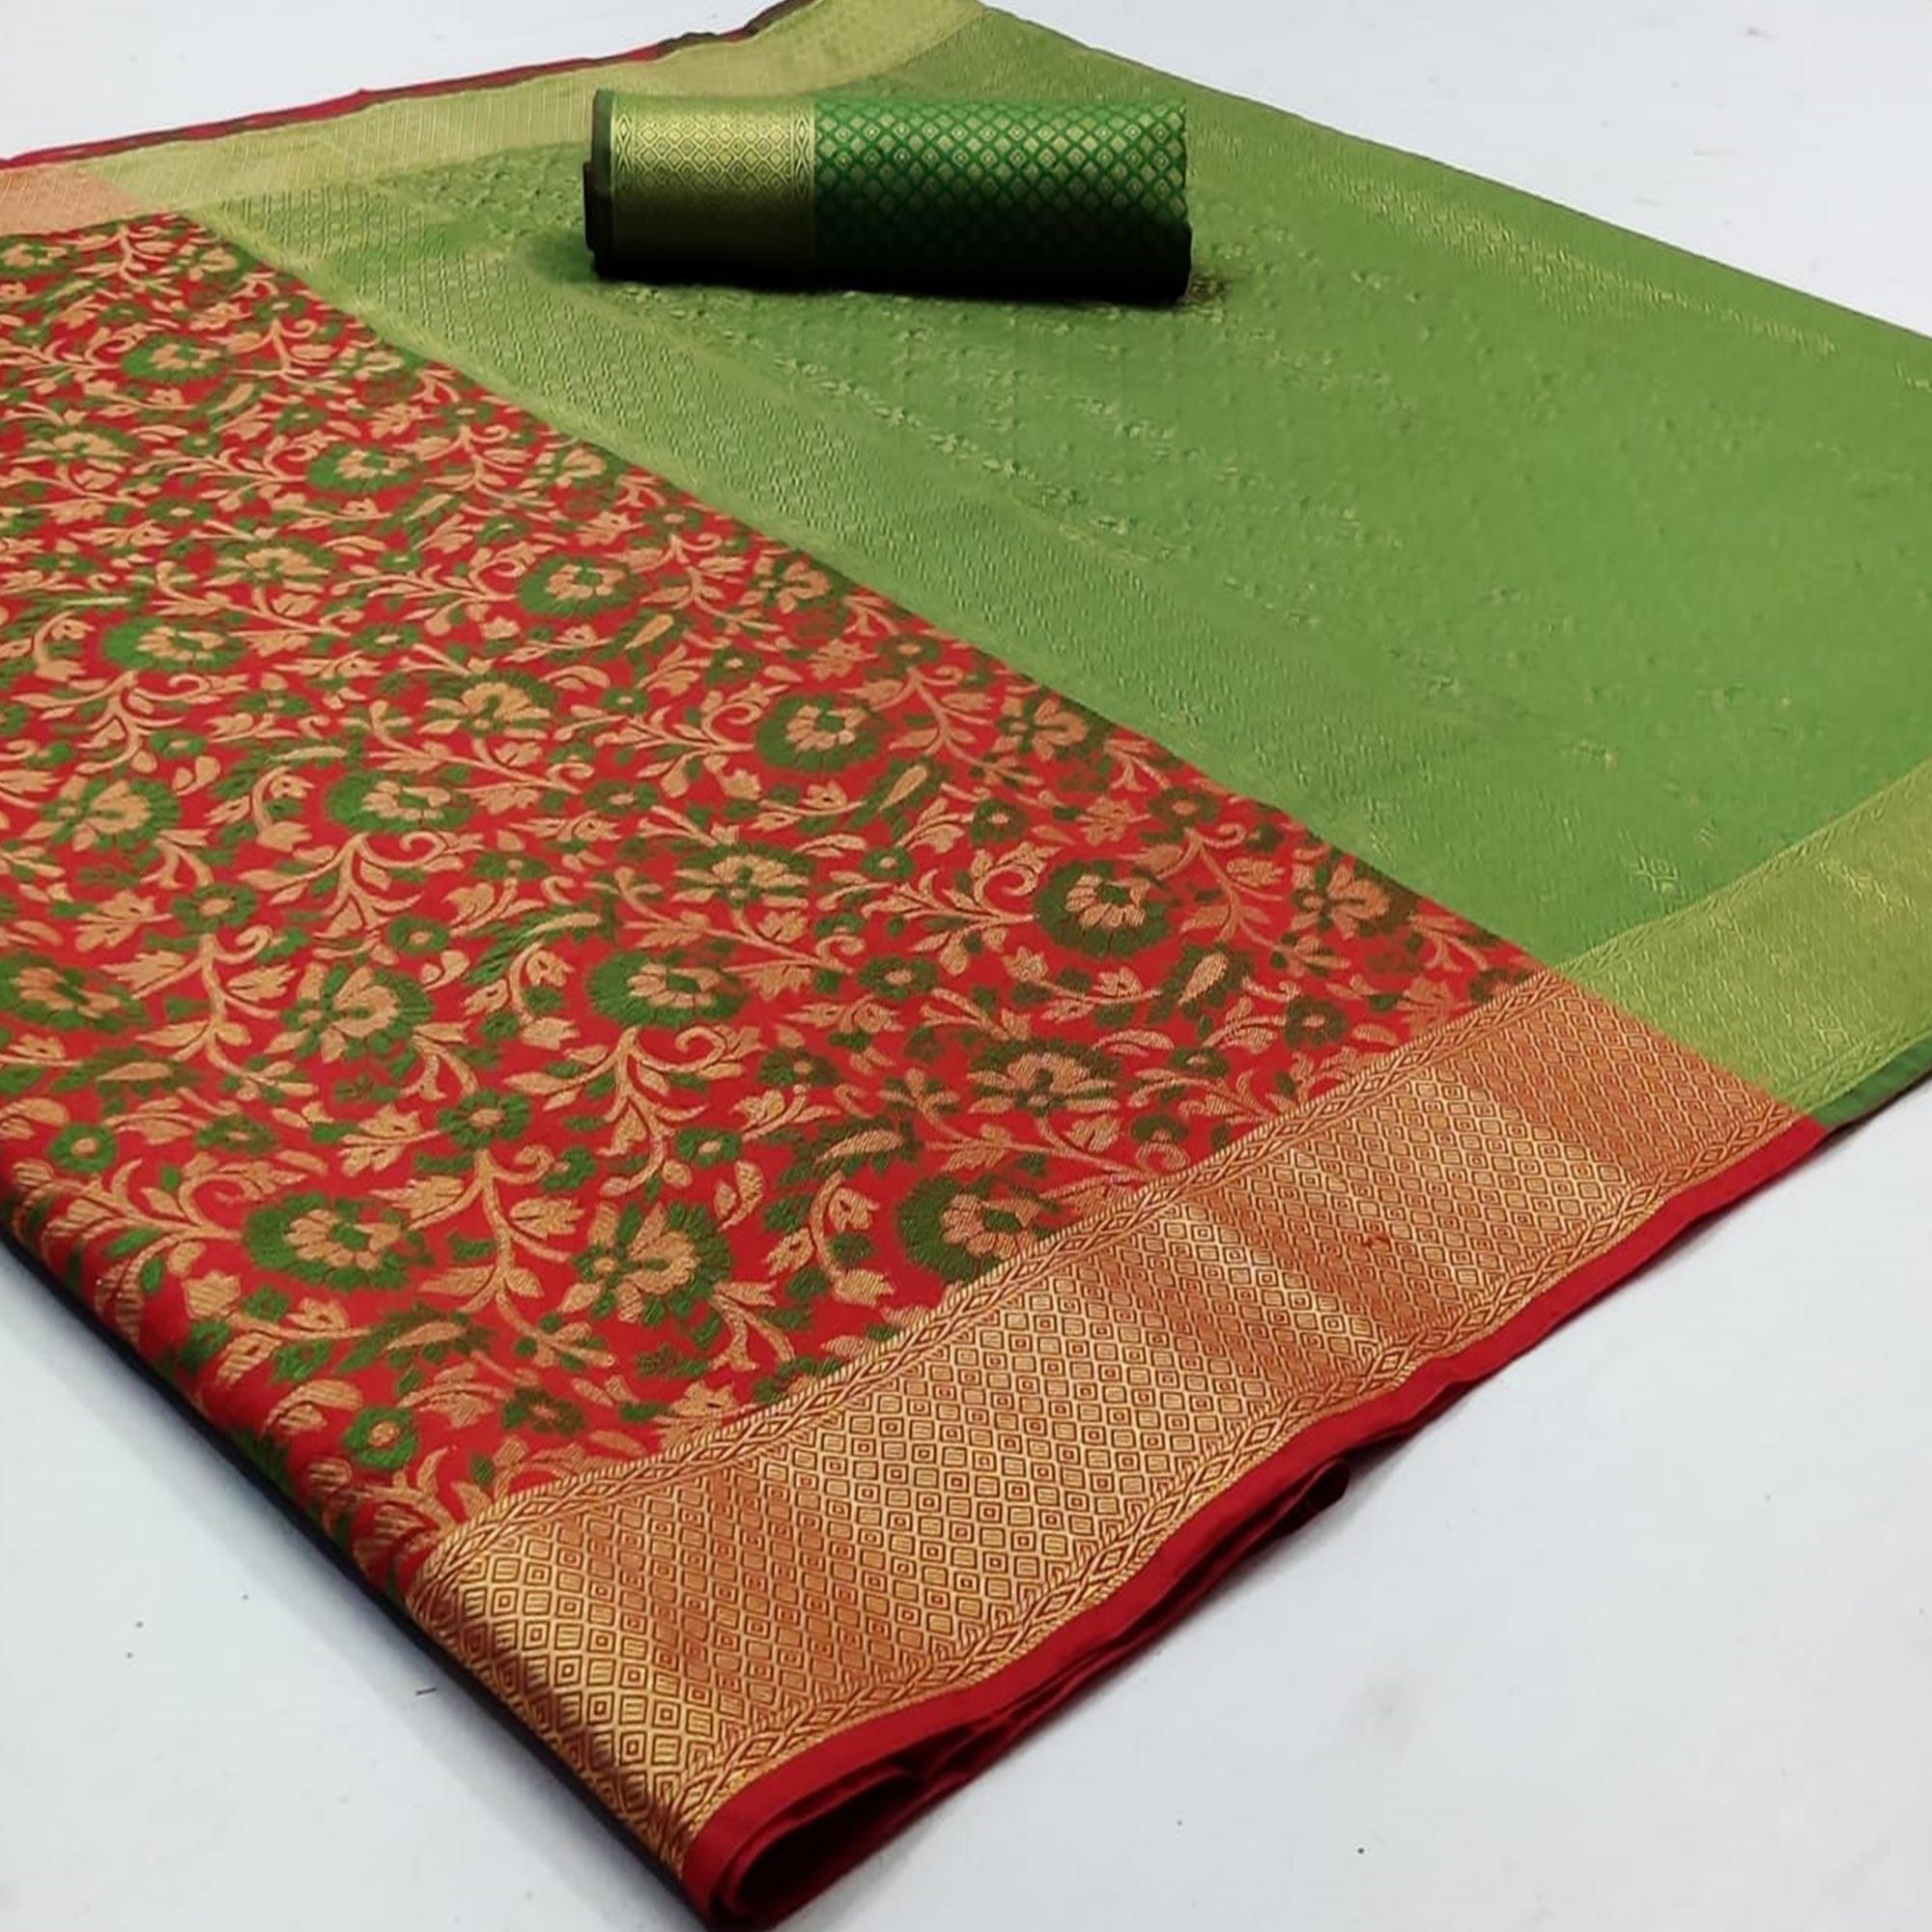 Blooming Red Colored Festive Wear Woven Patola Silk Saree - Peachmode